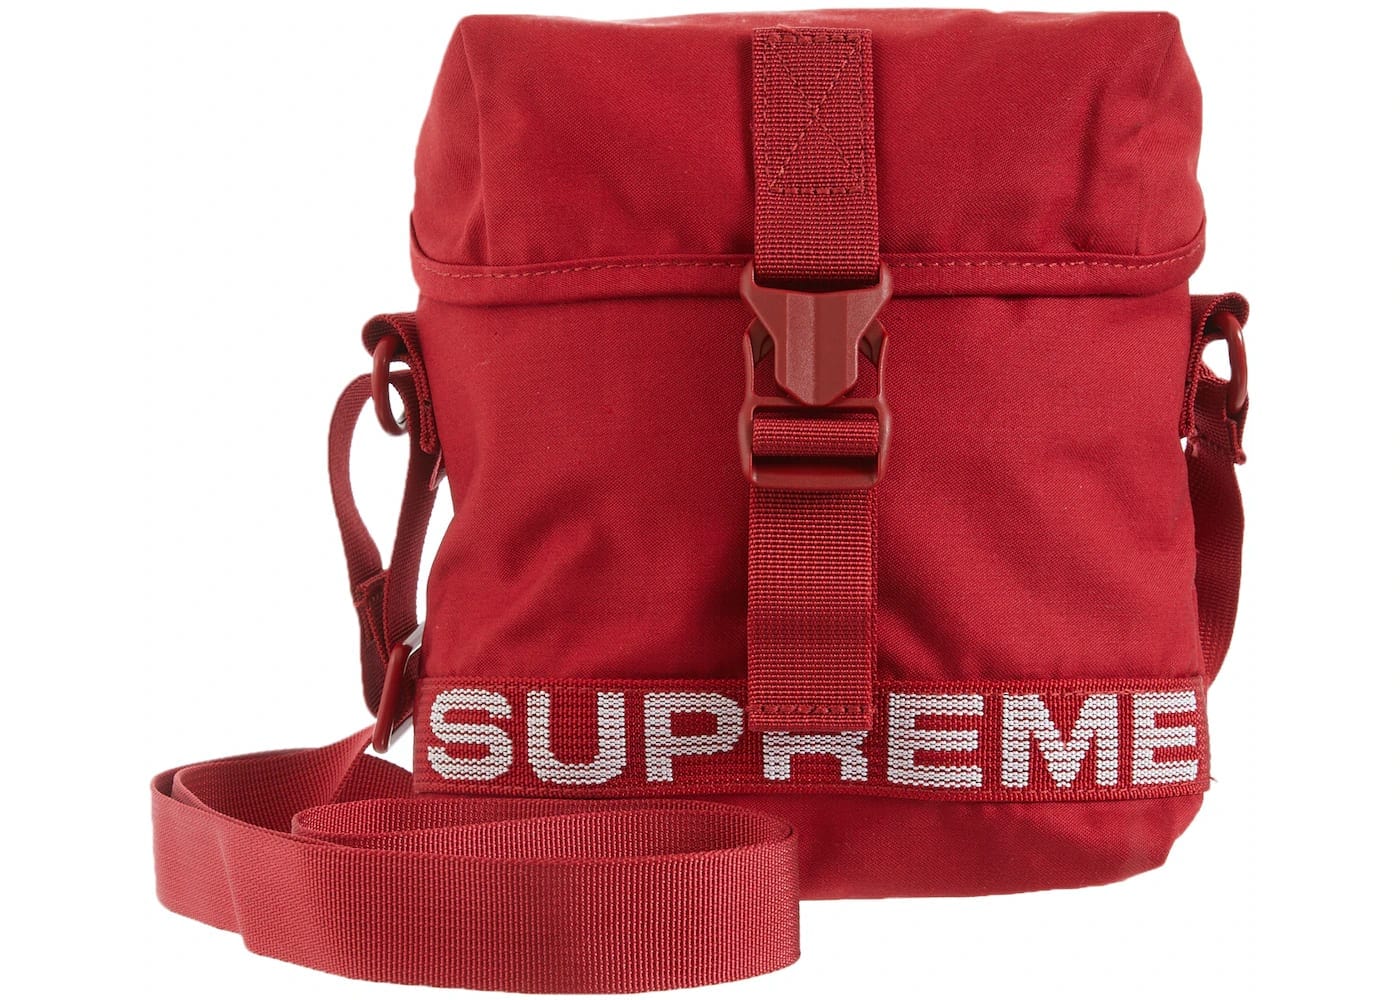 Supreme Sling bag - RED Limited - New STYLE Collection